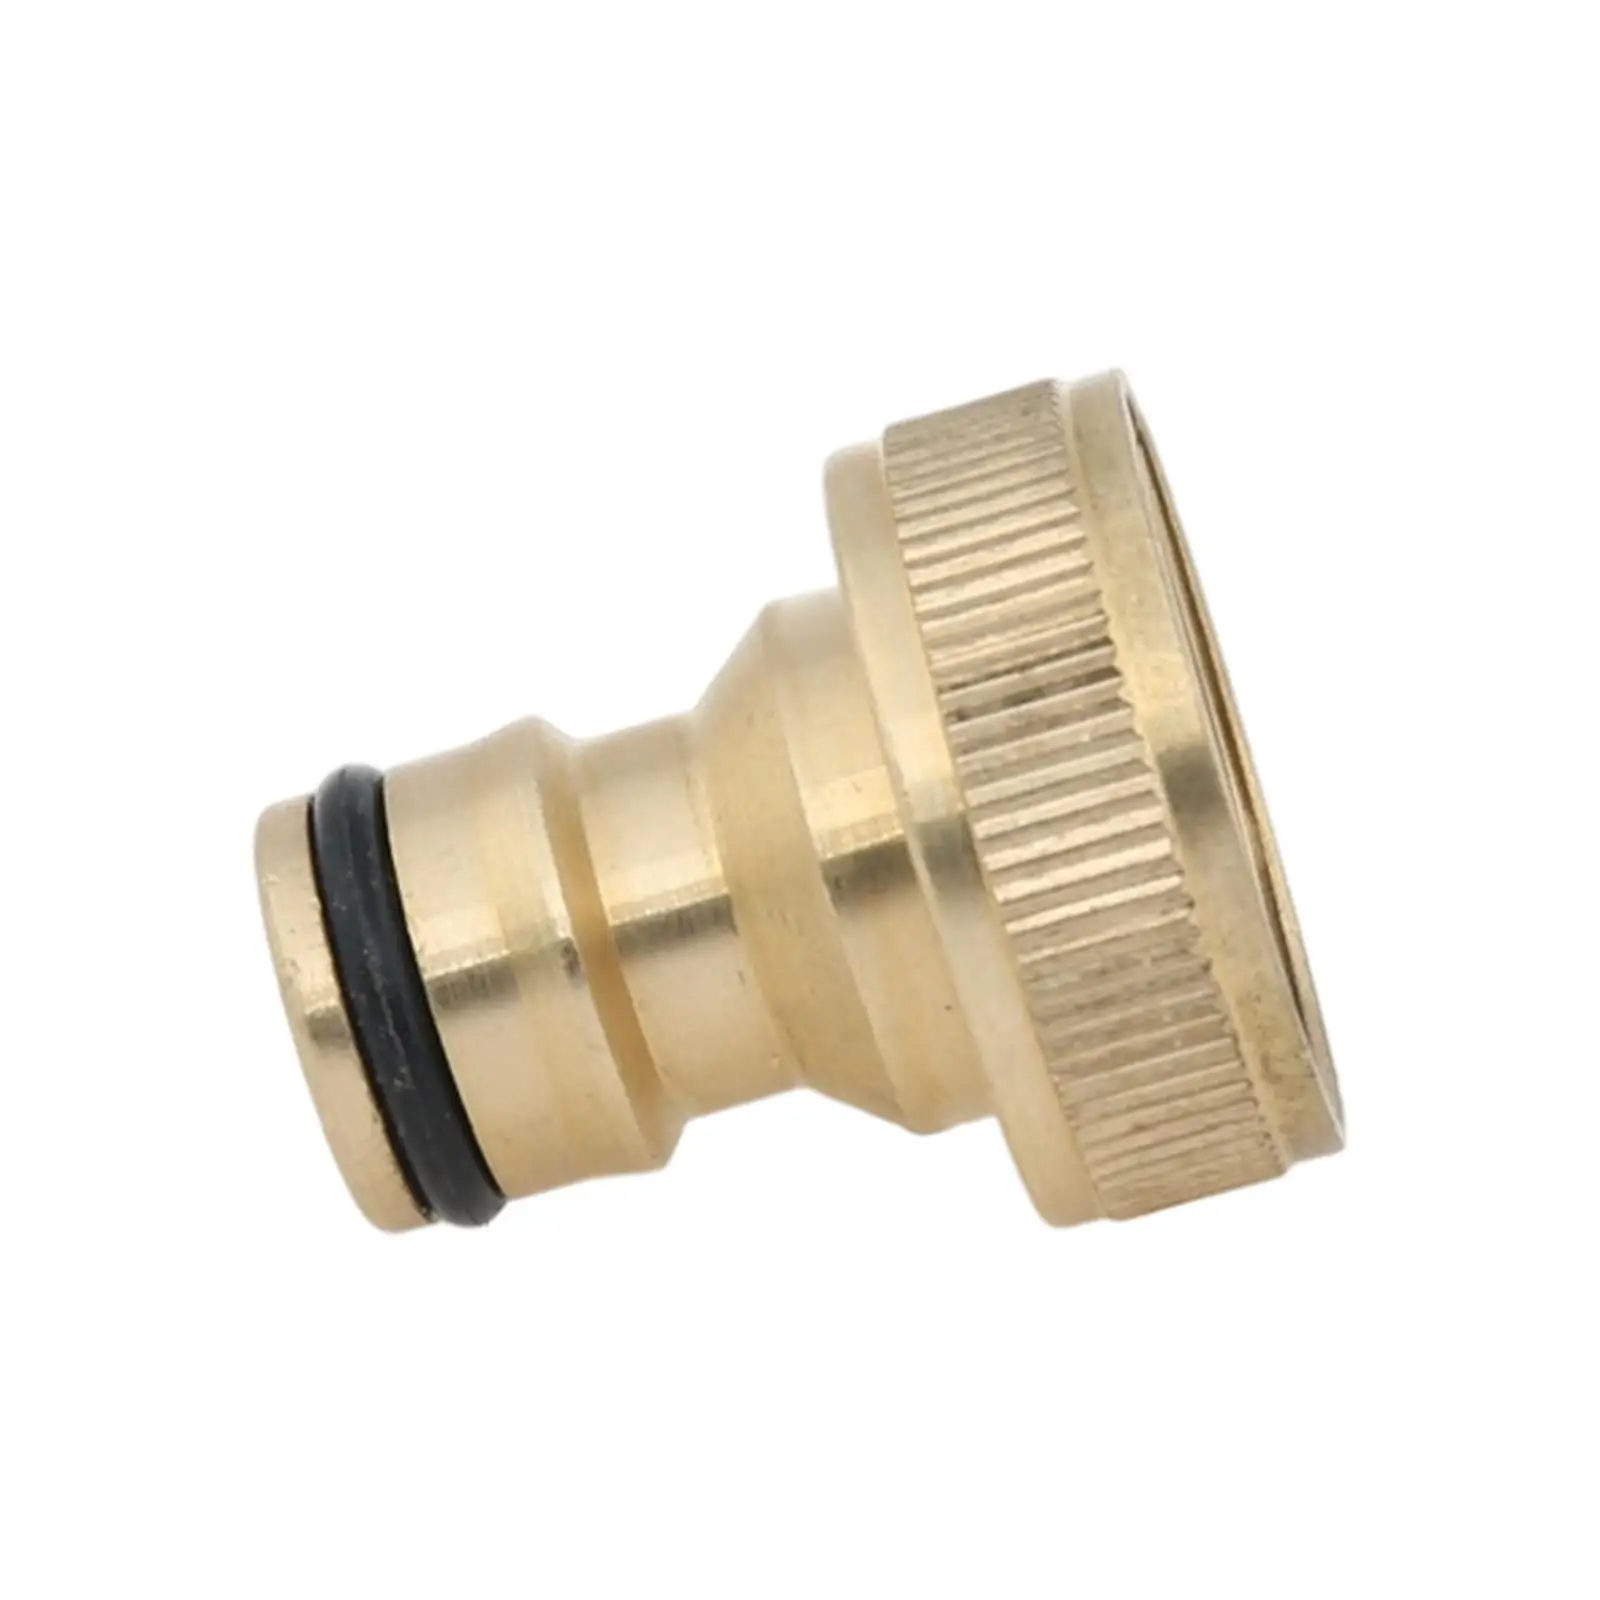 Solid Brass Hose Connector Fittings Quick Connect 6cm Repair High Pressure Washer Quick Connector for Garden Hose Accessory